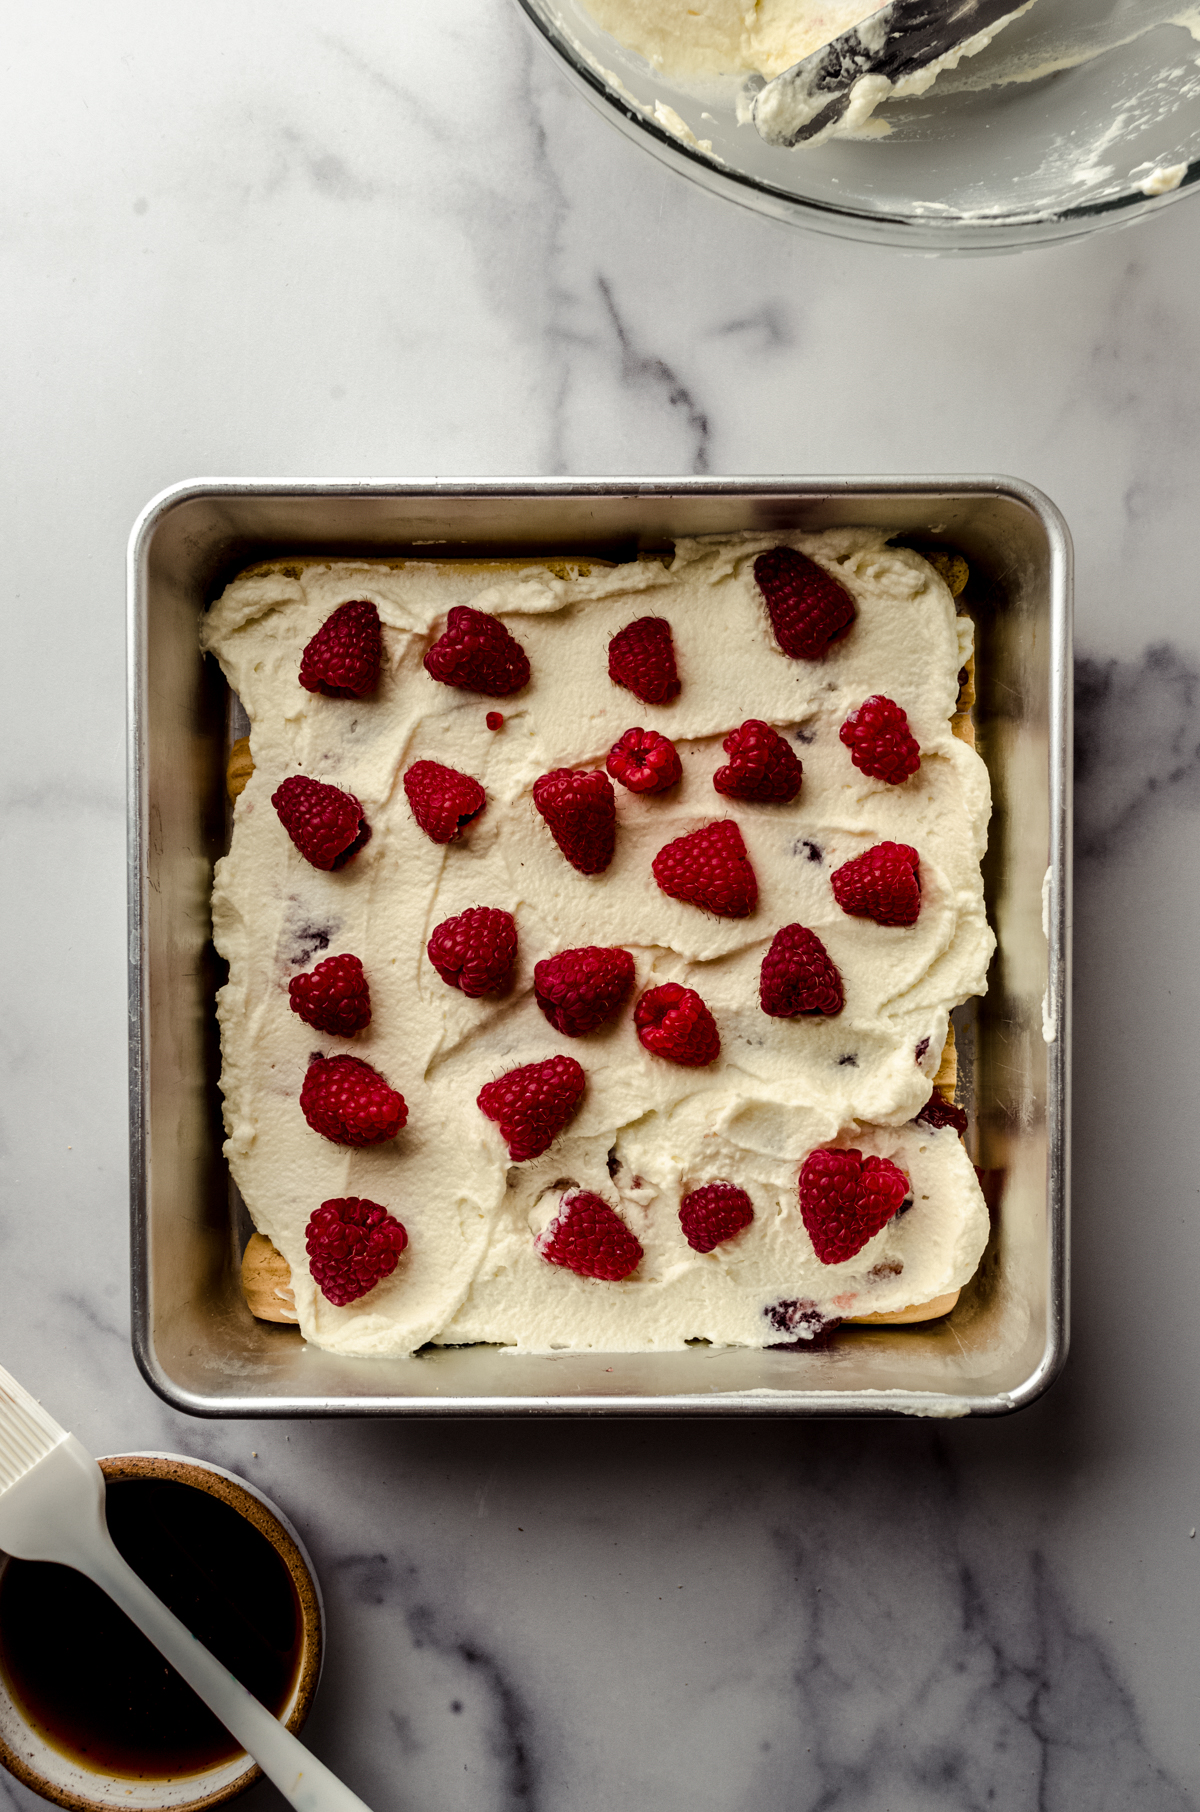 Aerial photo of a layer of mascarpone cream and raspberries on top of a layer of ladyfingers and raspberry preserves in the bottom of a square baking pan as the base for raspberry tiramisu.